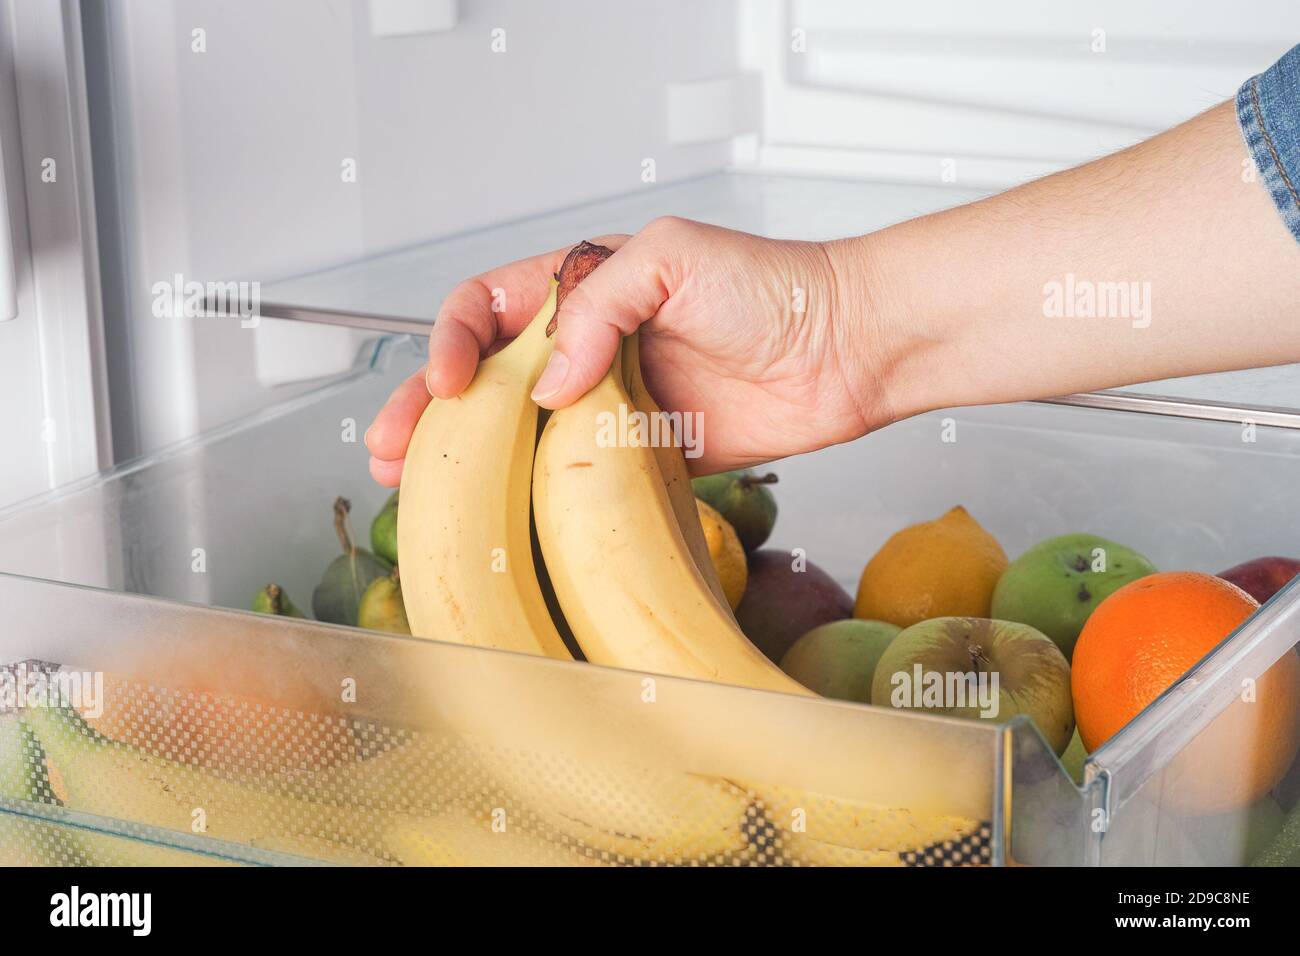 Woman getting fresh bananas from a fridge. Close up. Stock Photo